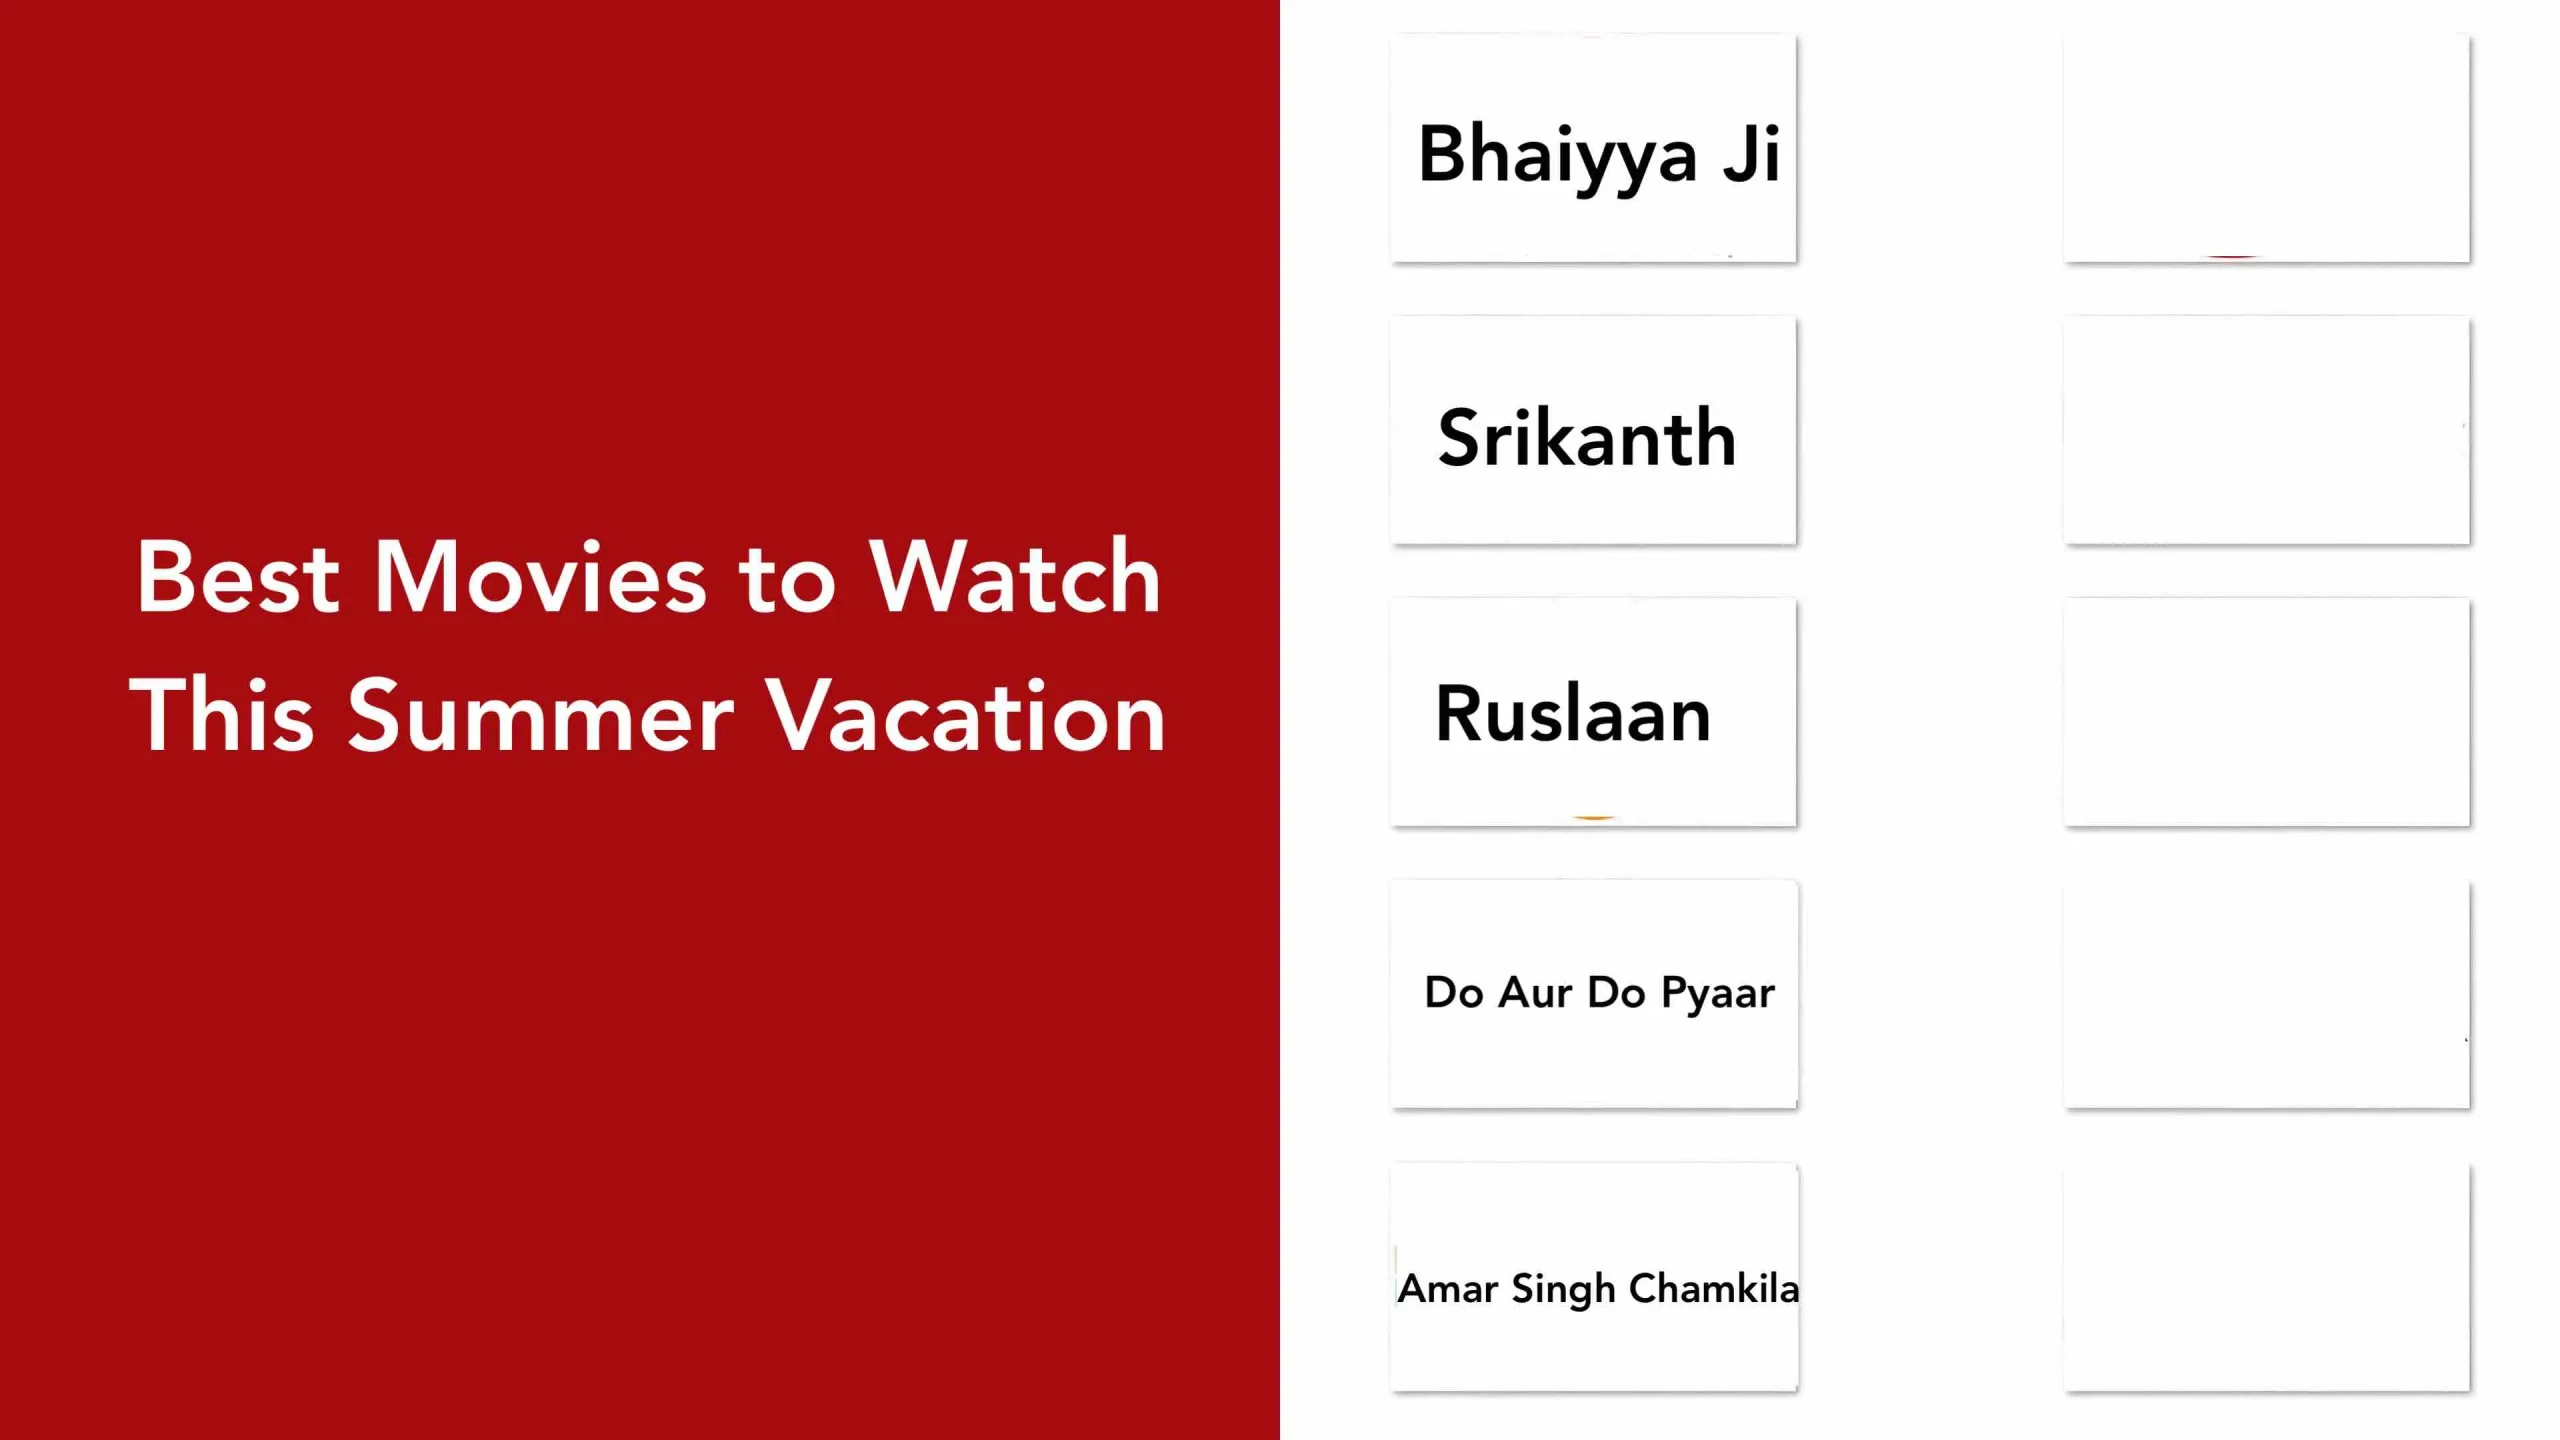 Best Movies to Watch This Summer Vacation